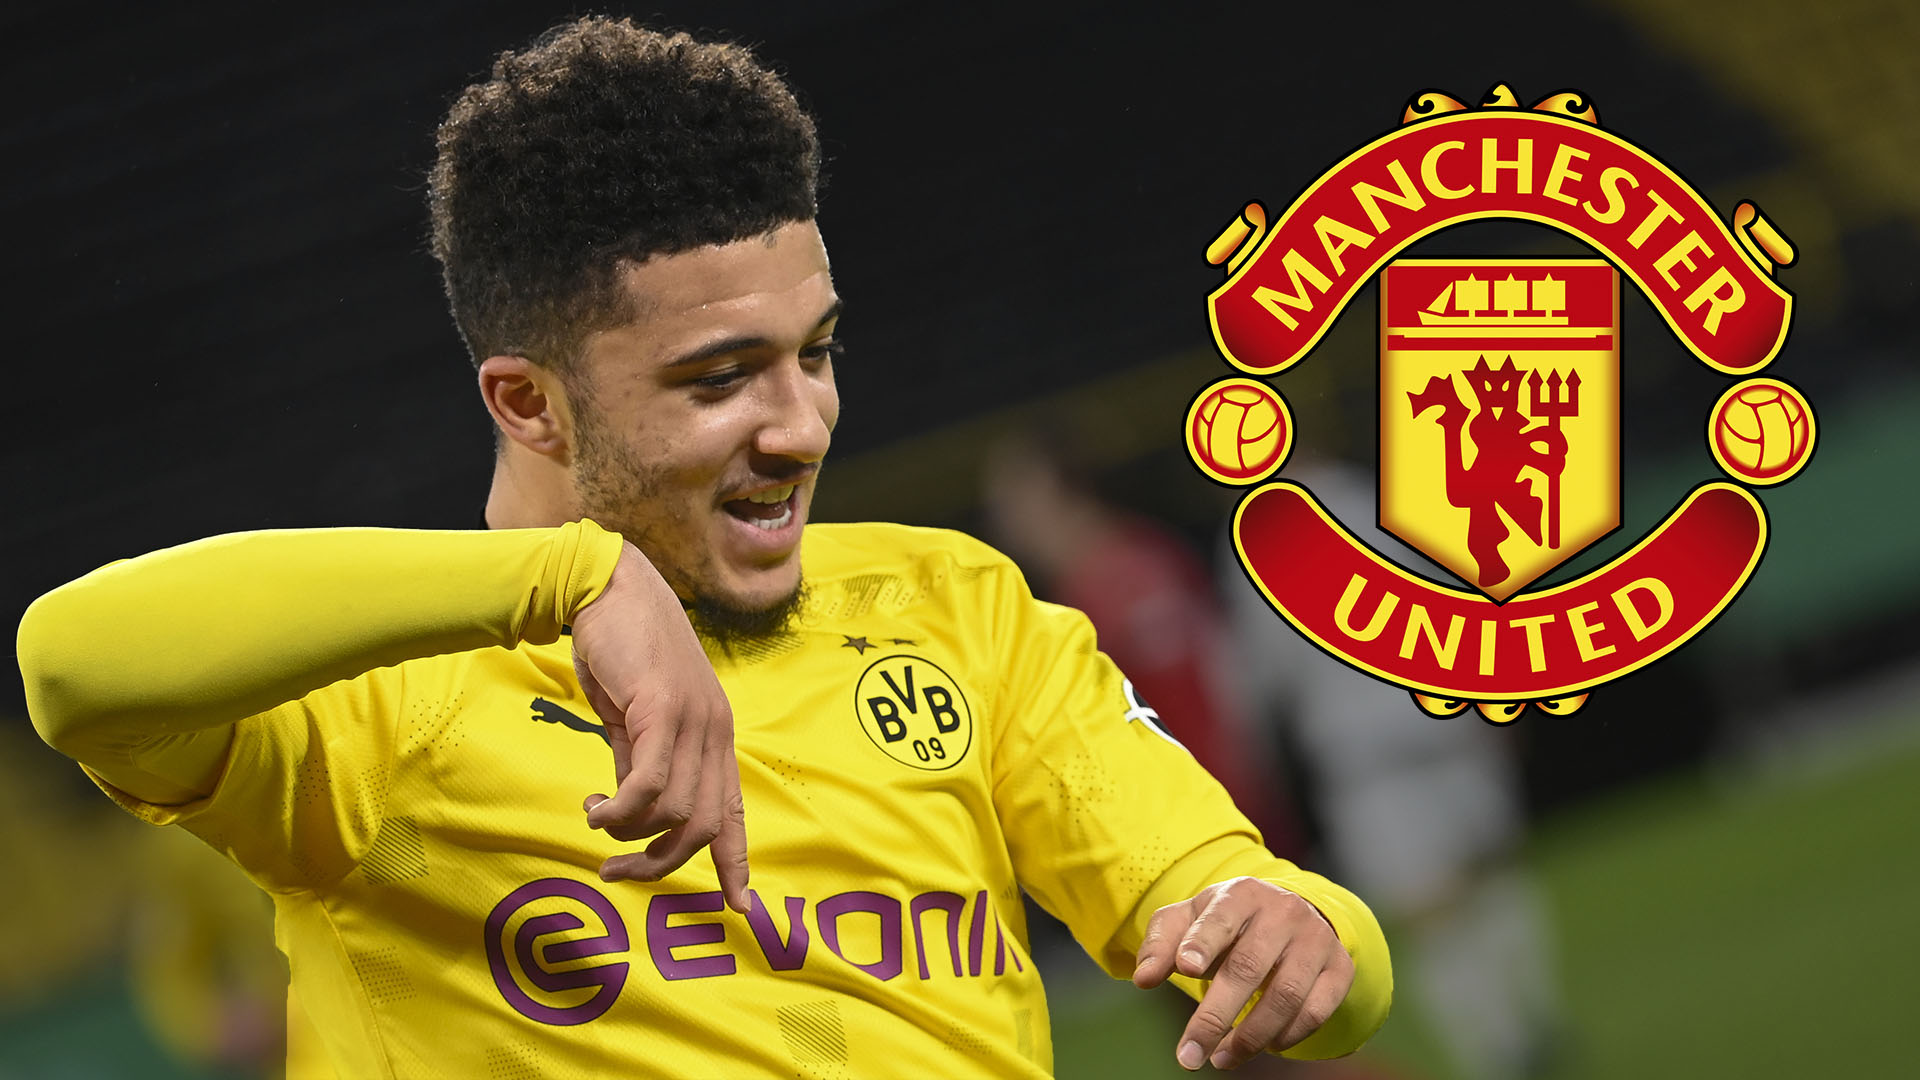 Man Utd complete £73m Sancho signing as England international signs five-year contract